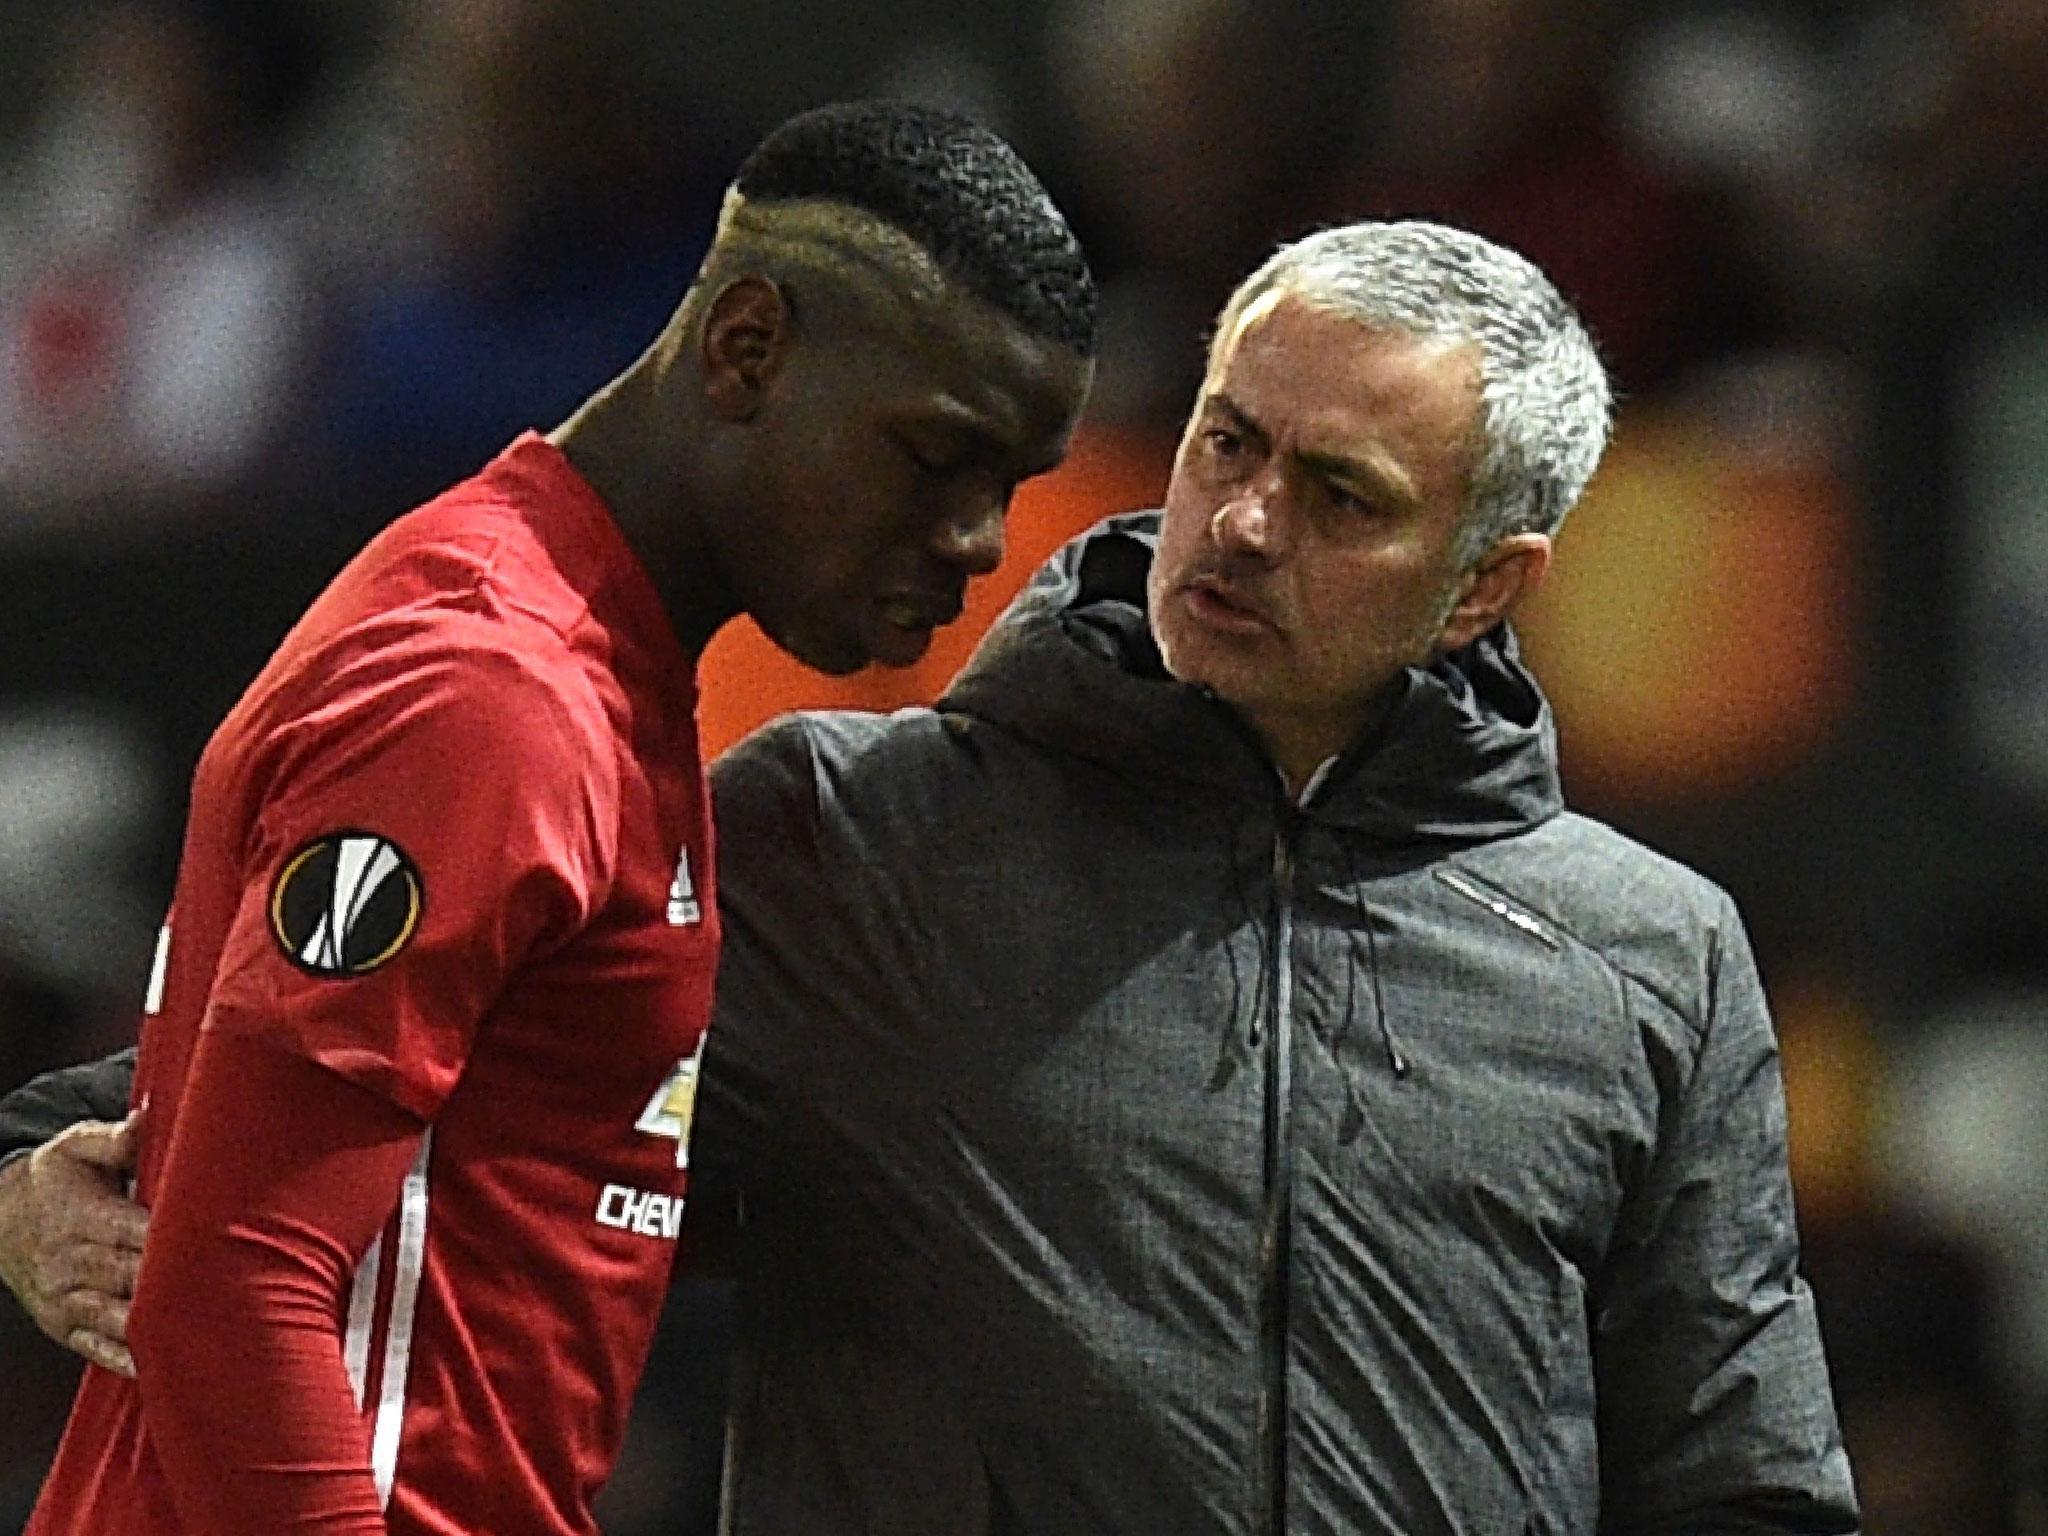 Paul Pogba will be part of the Manchester United squad that will travel to Spain